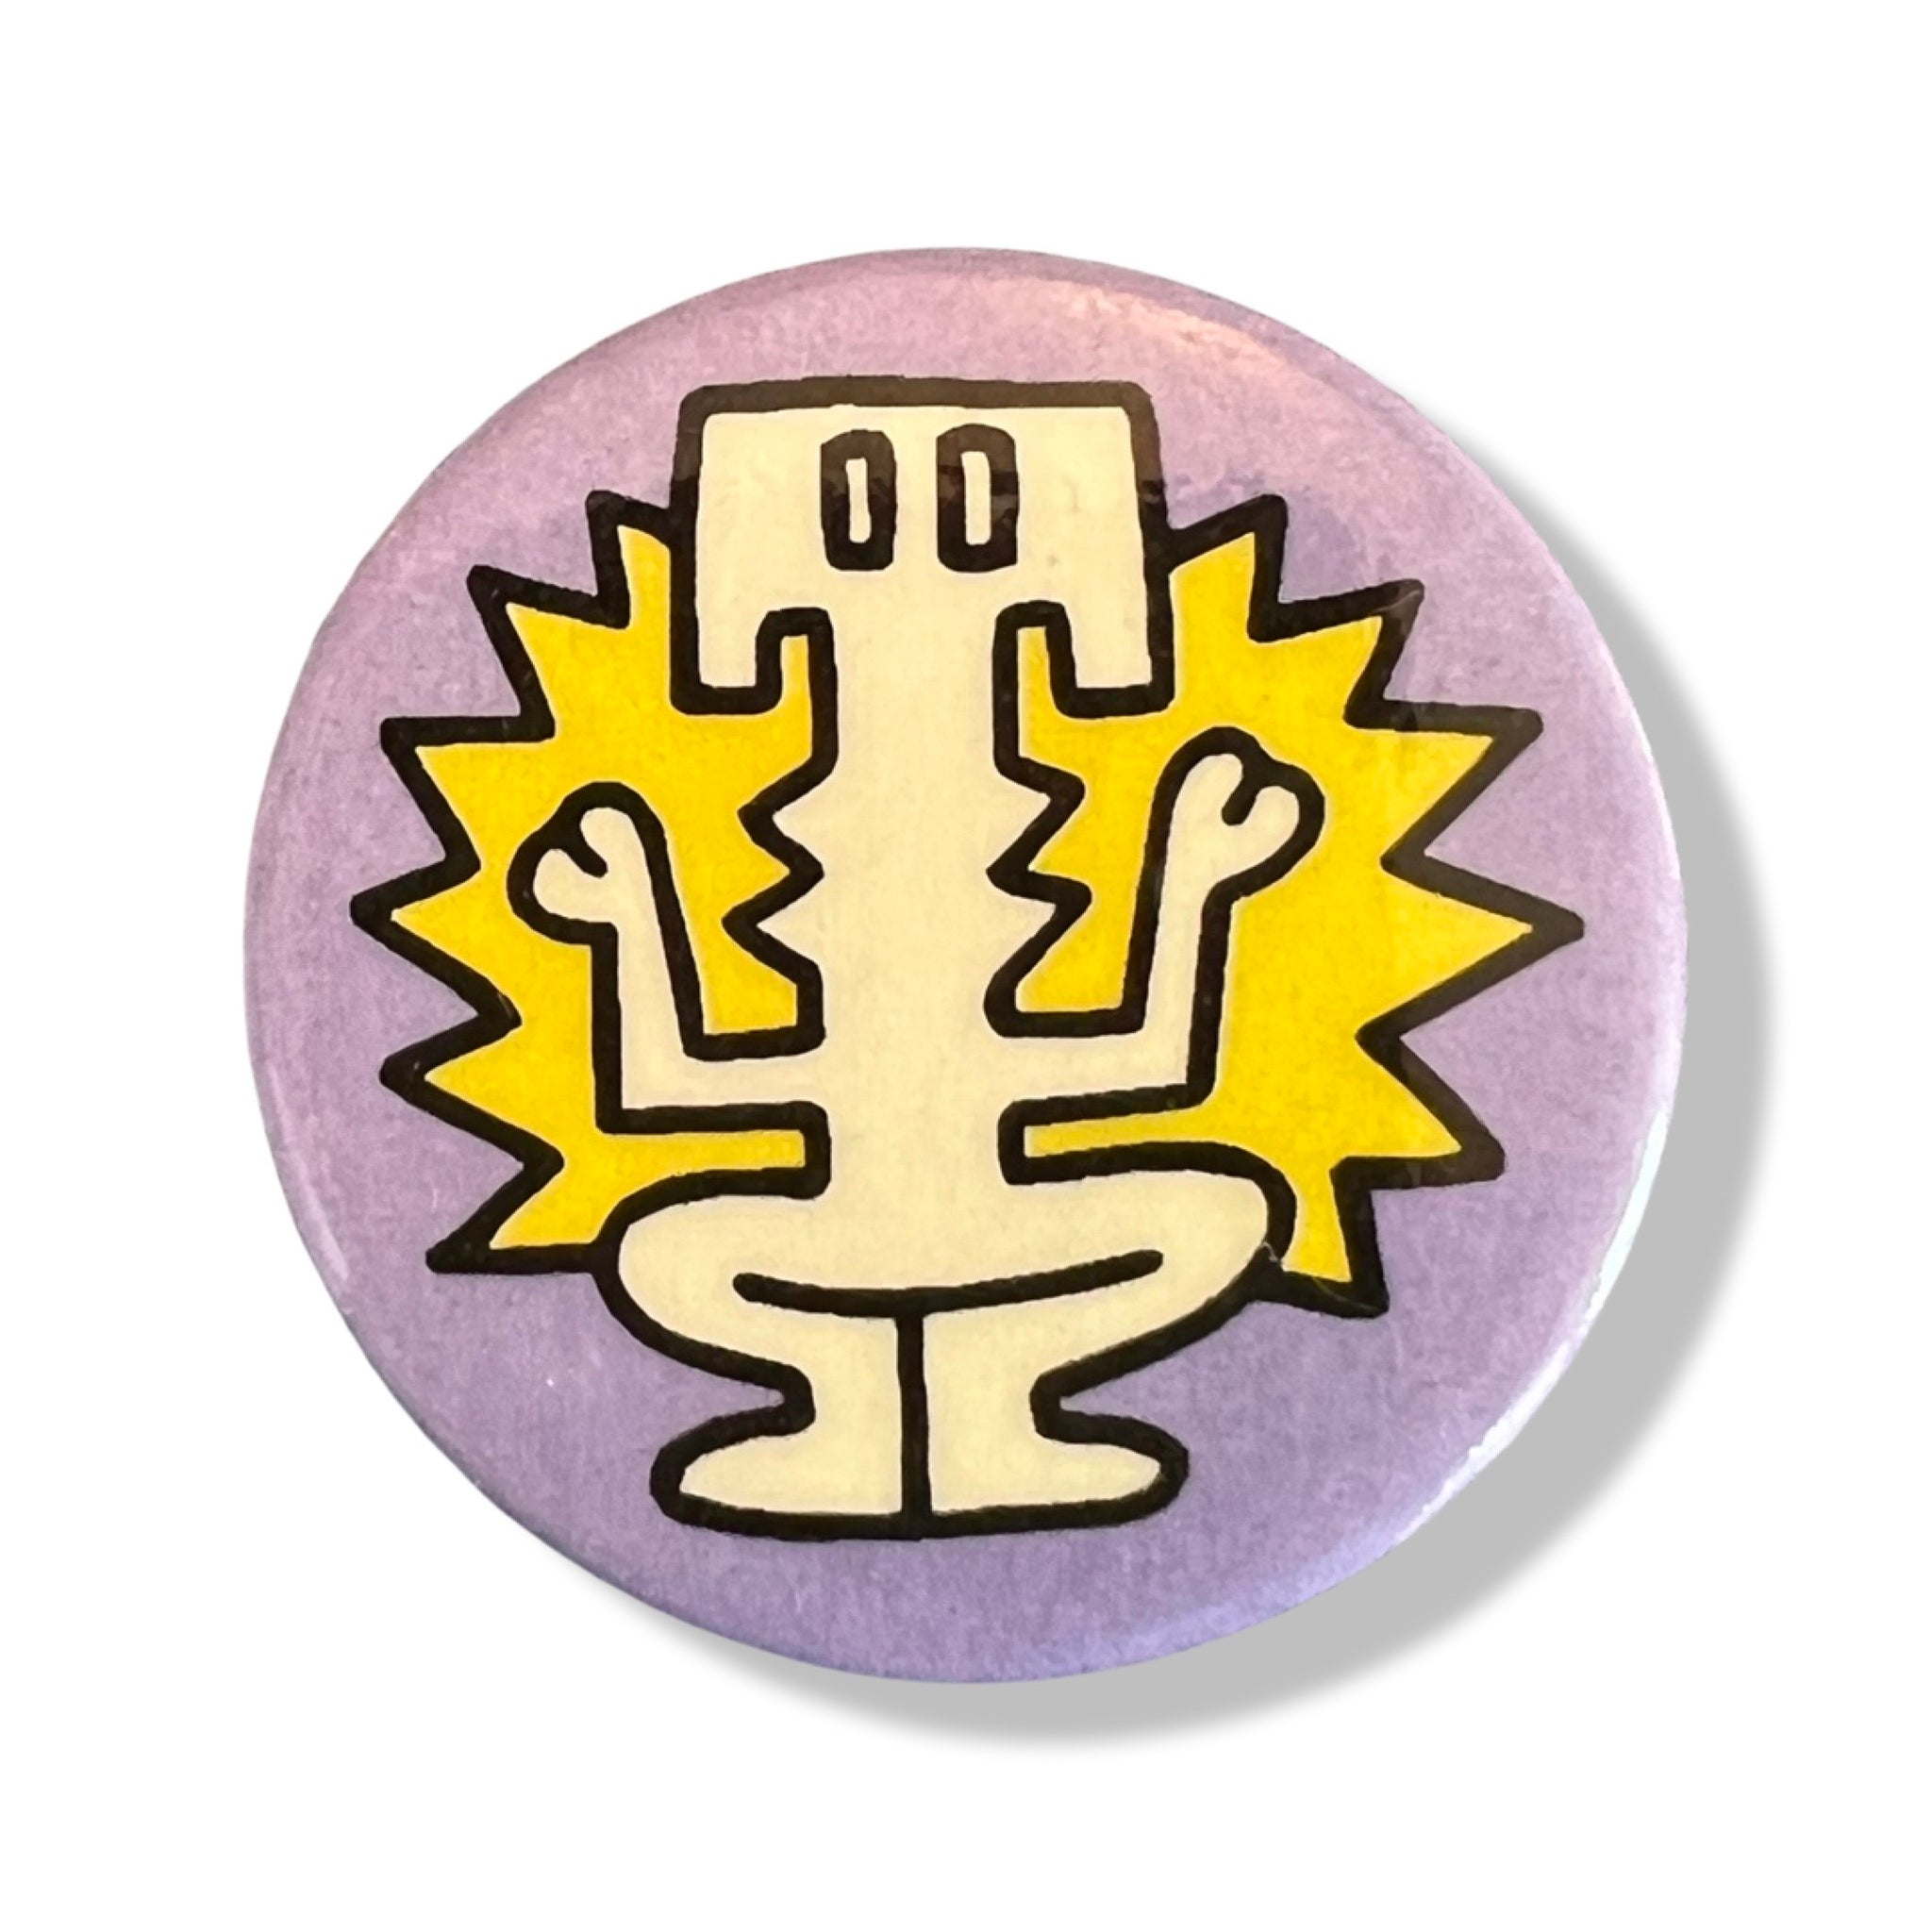 Keith Haring - Original Button from the New York Pop Shop